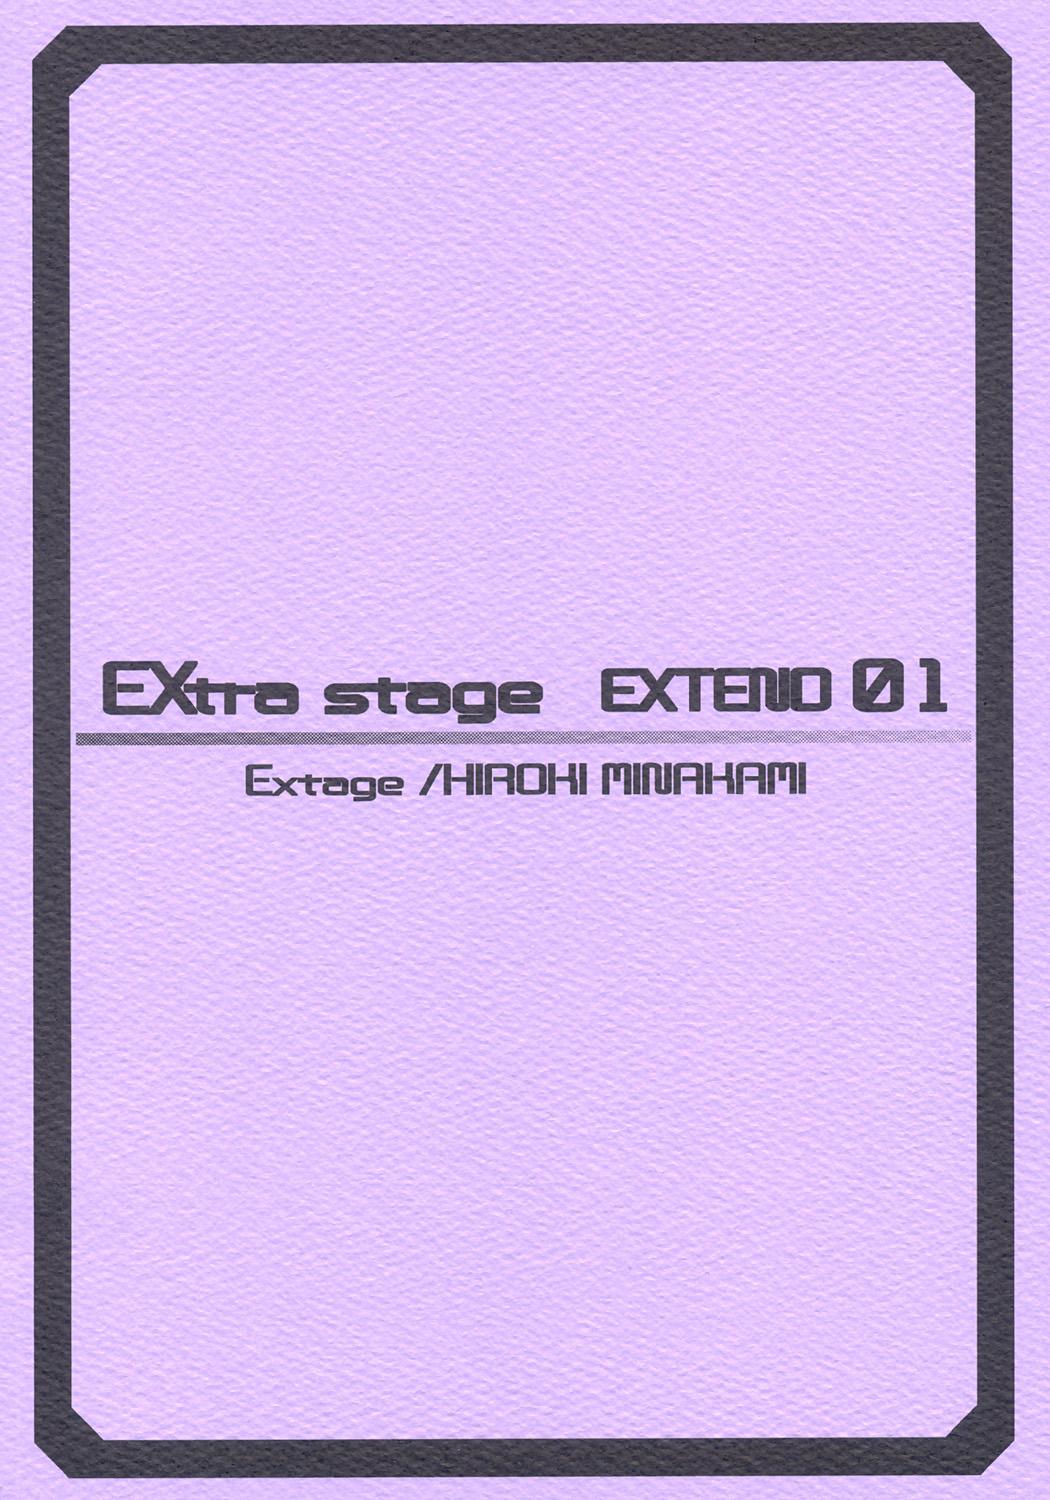 EXtra stage EXTEND 01 17